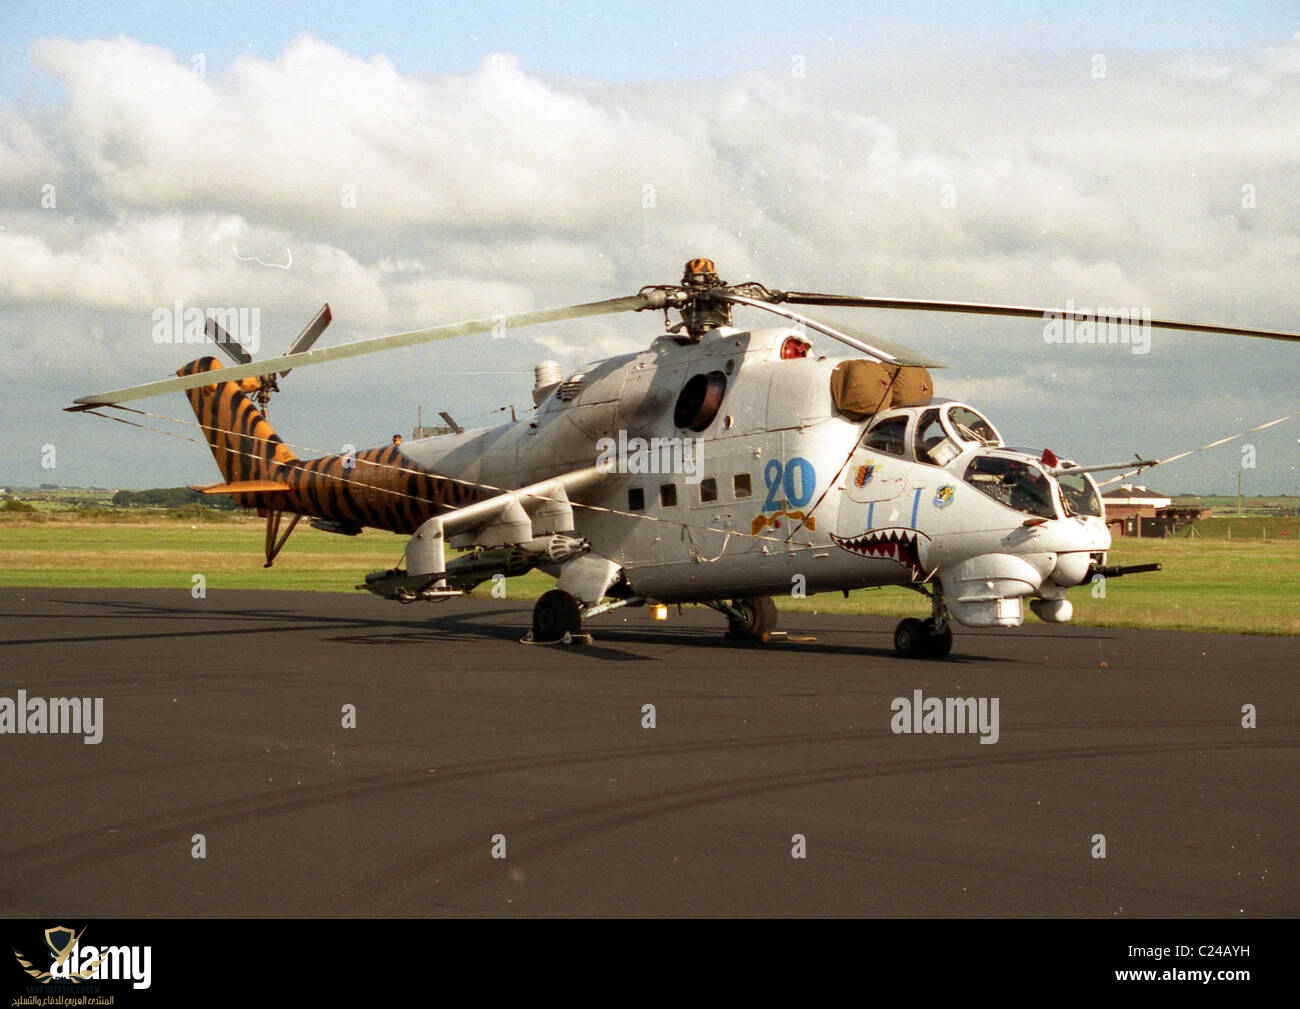 the-mil-mi-24-cyrillic-24-nato-reporting-name-hind-is-a-large-helicopter-C24AYH.jpg